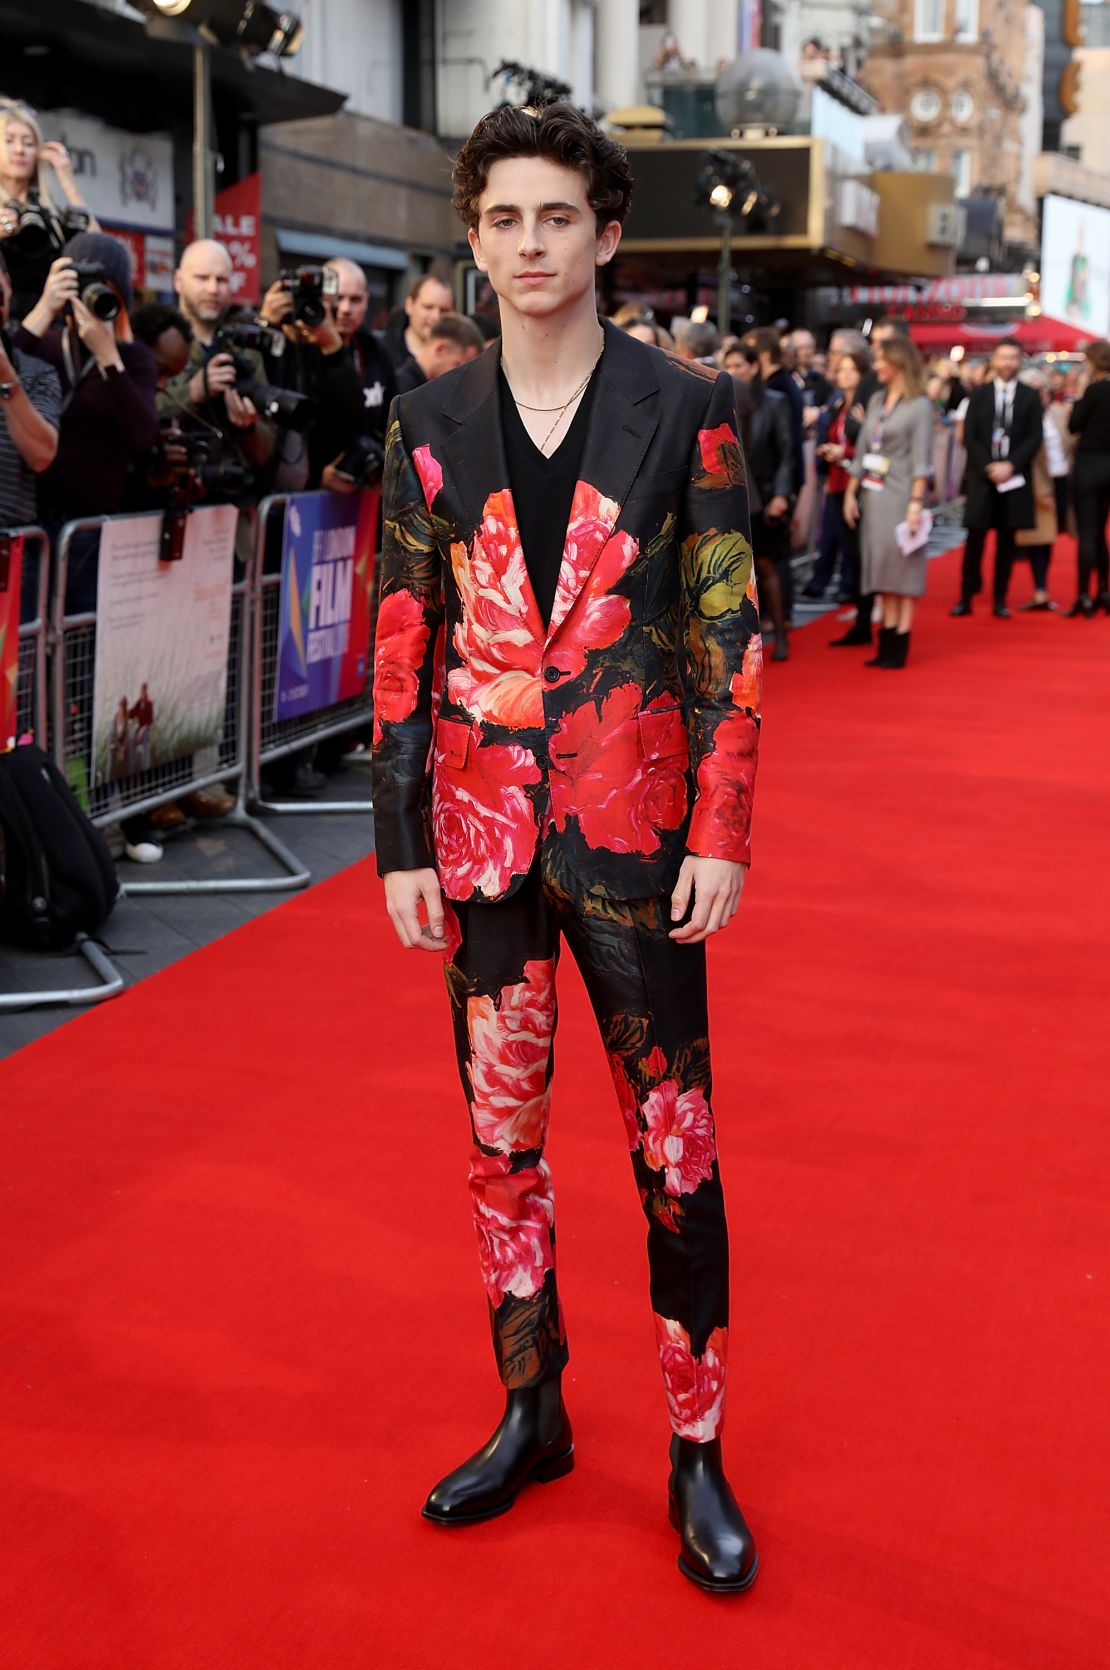 Timothée Chalamet Shakes up the Red Carpet with a High-Fashion